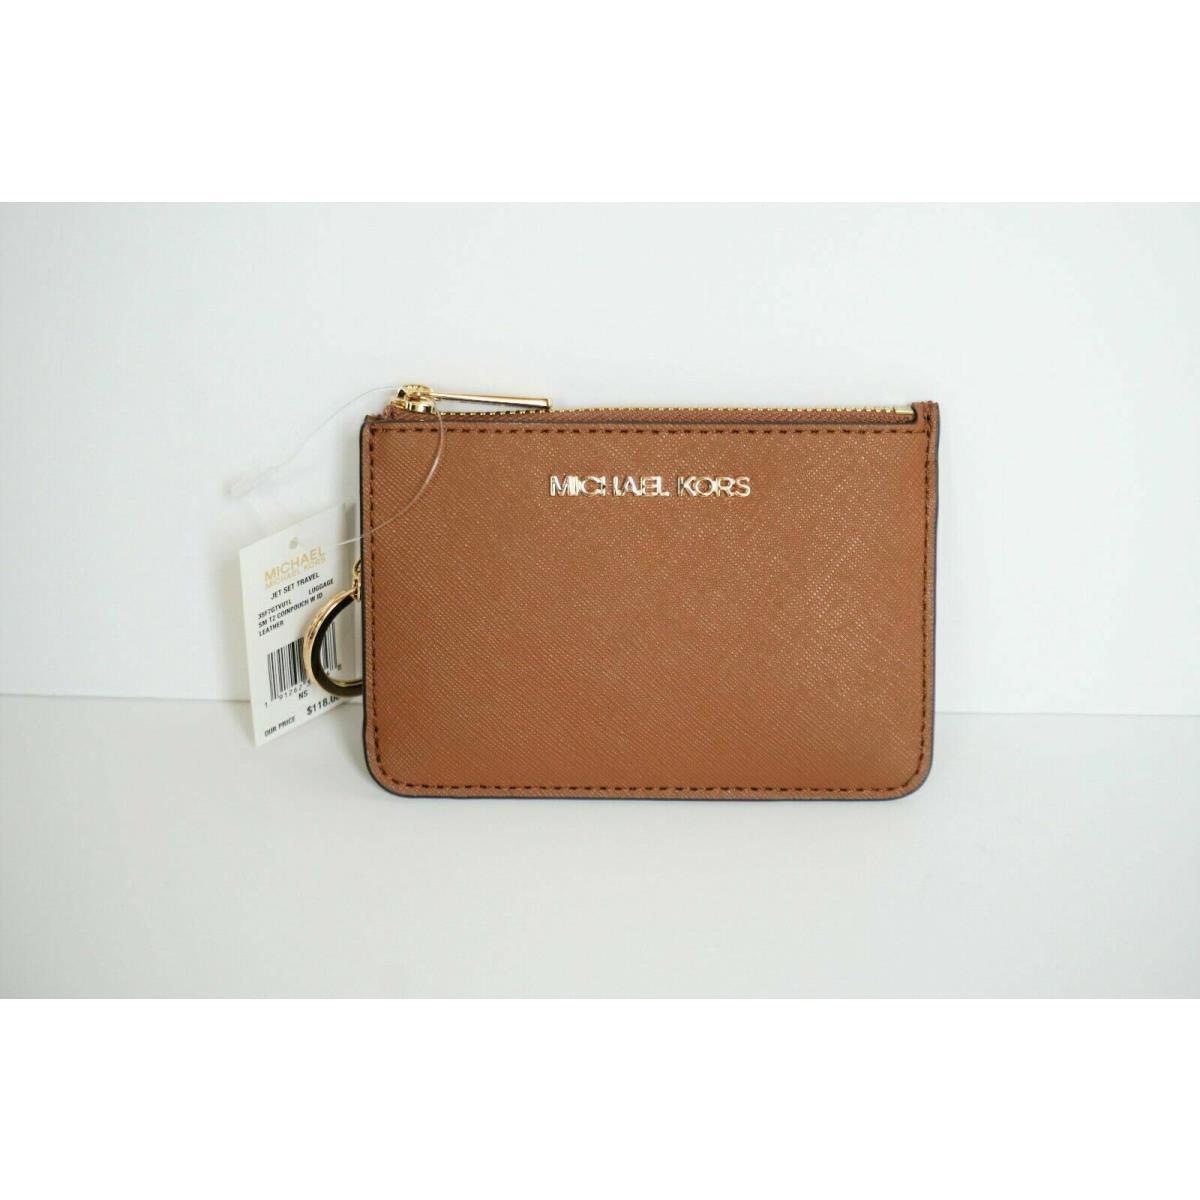 Michael Kors Jet Set Travel S Coinpouch Id and 50 similar items